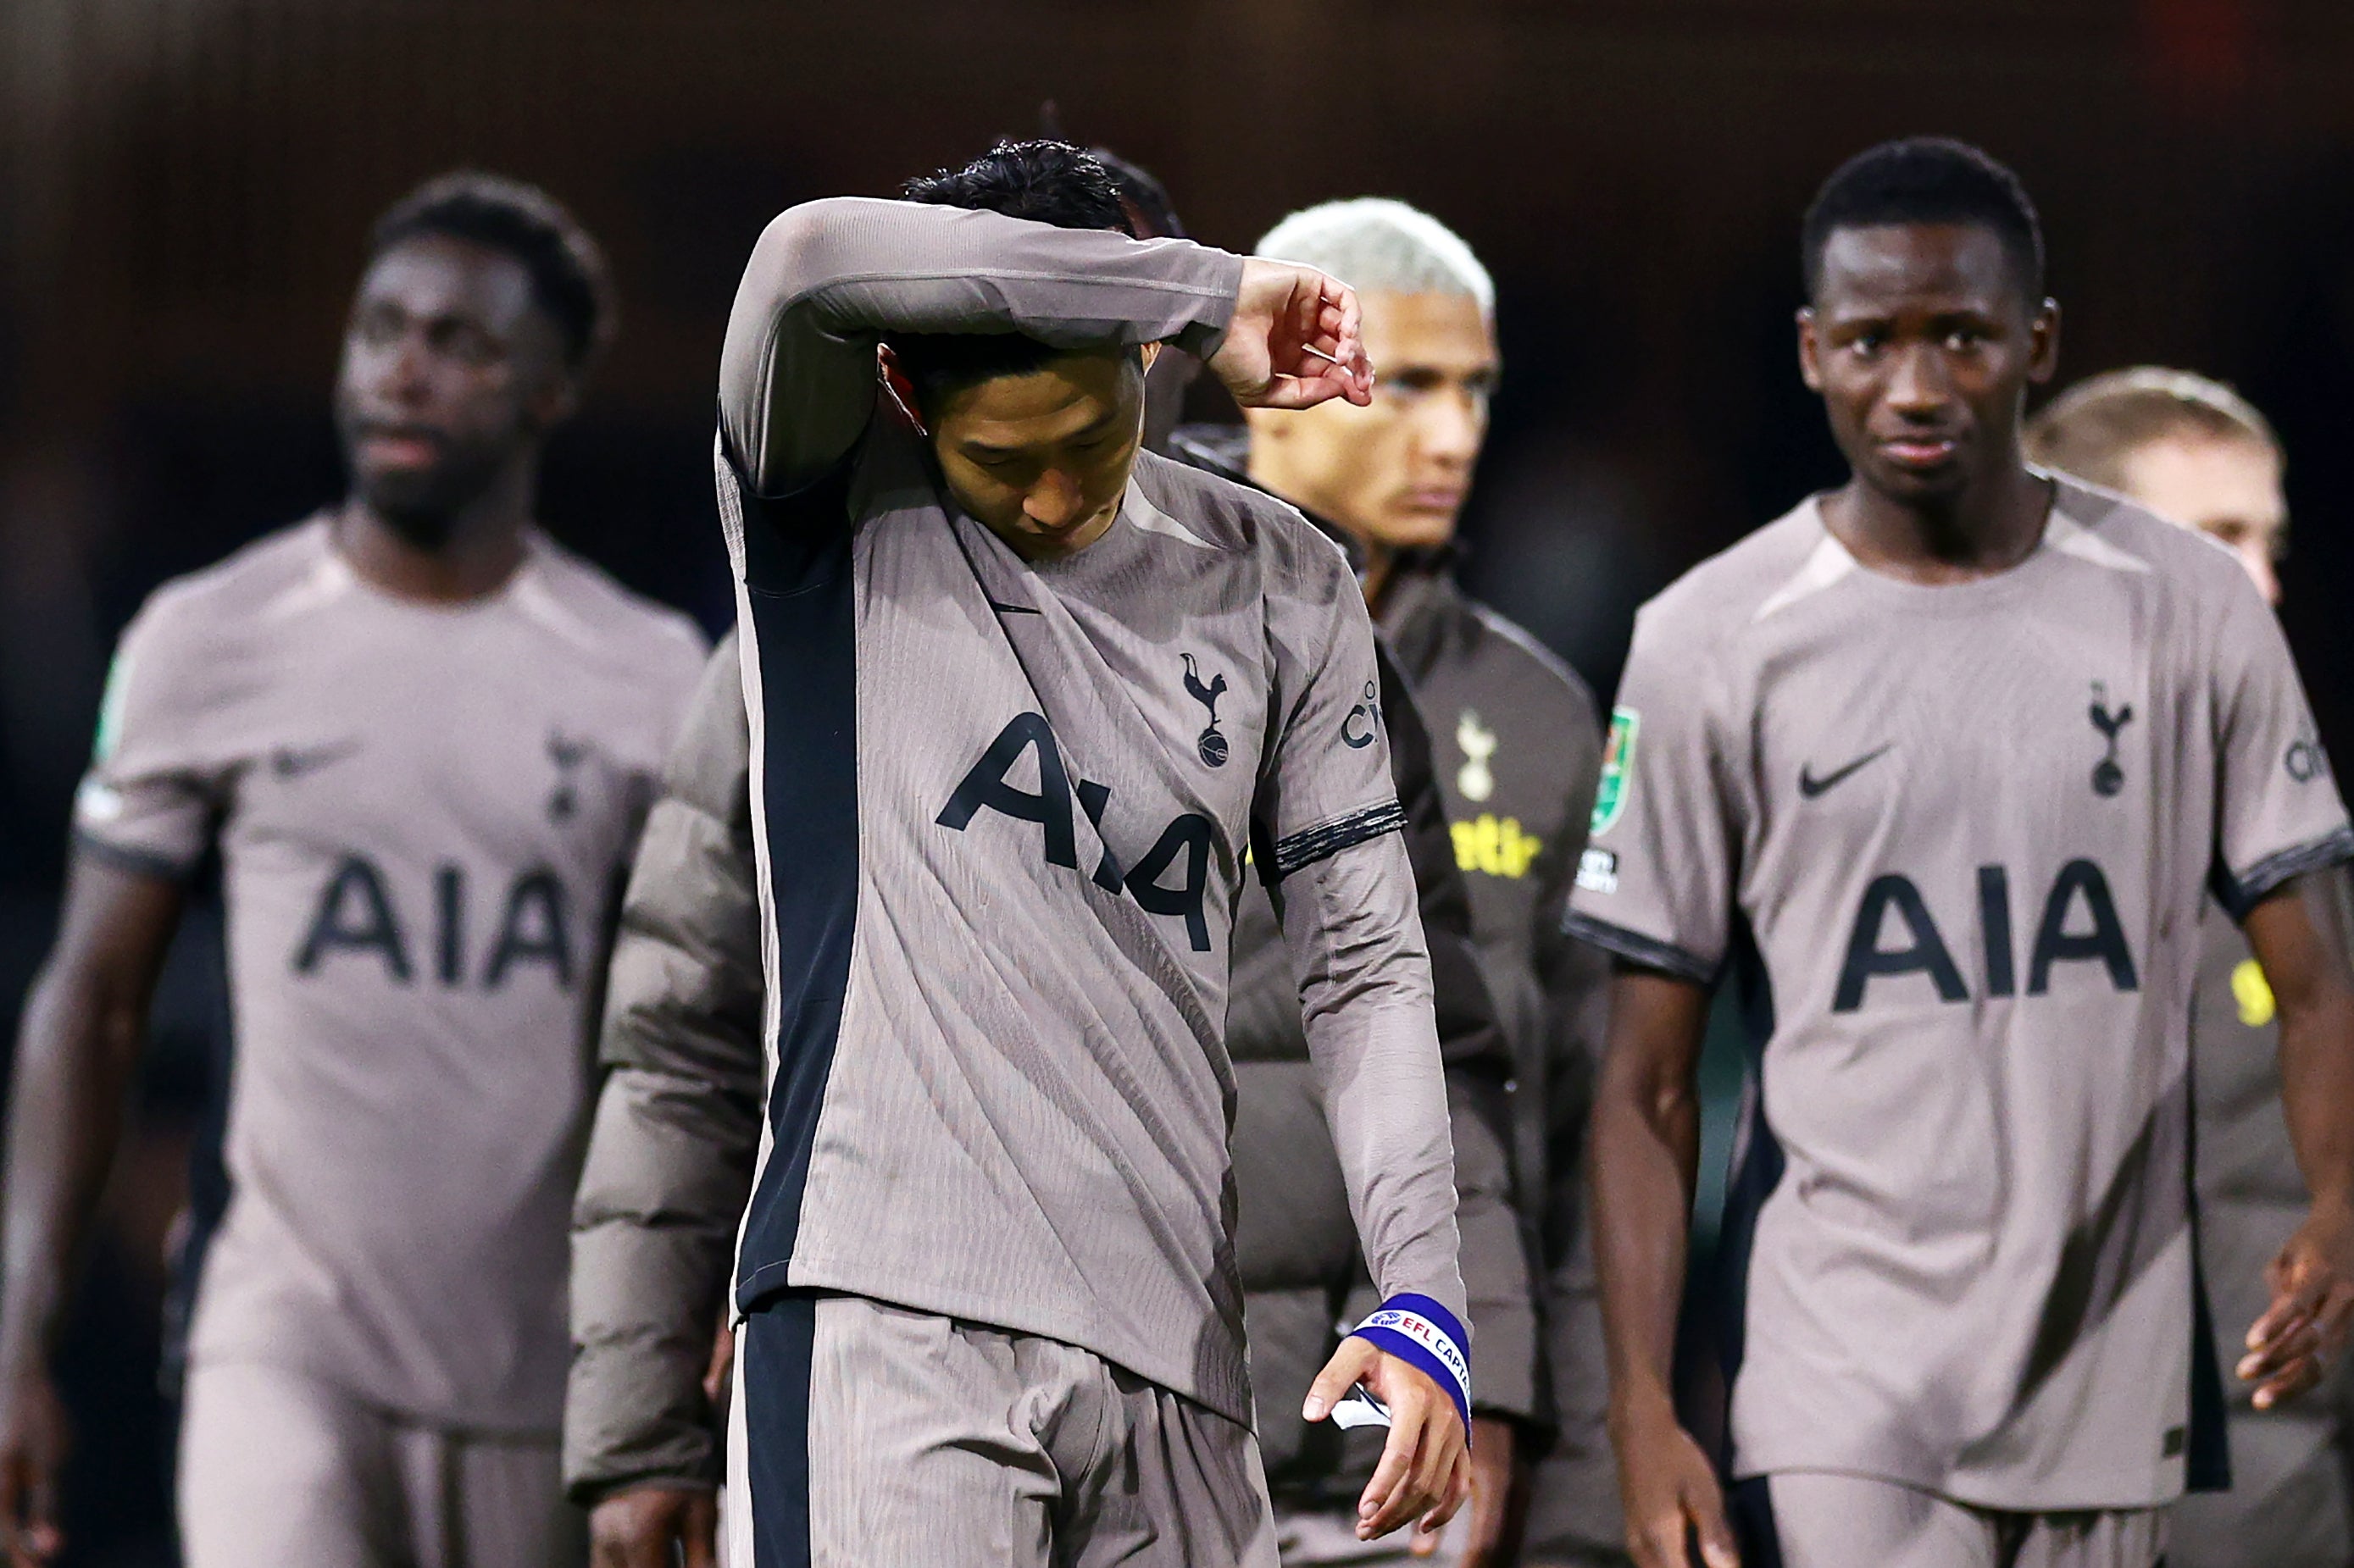 Tottenham crashed out of the Carabao Cup on penalties